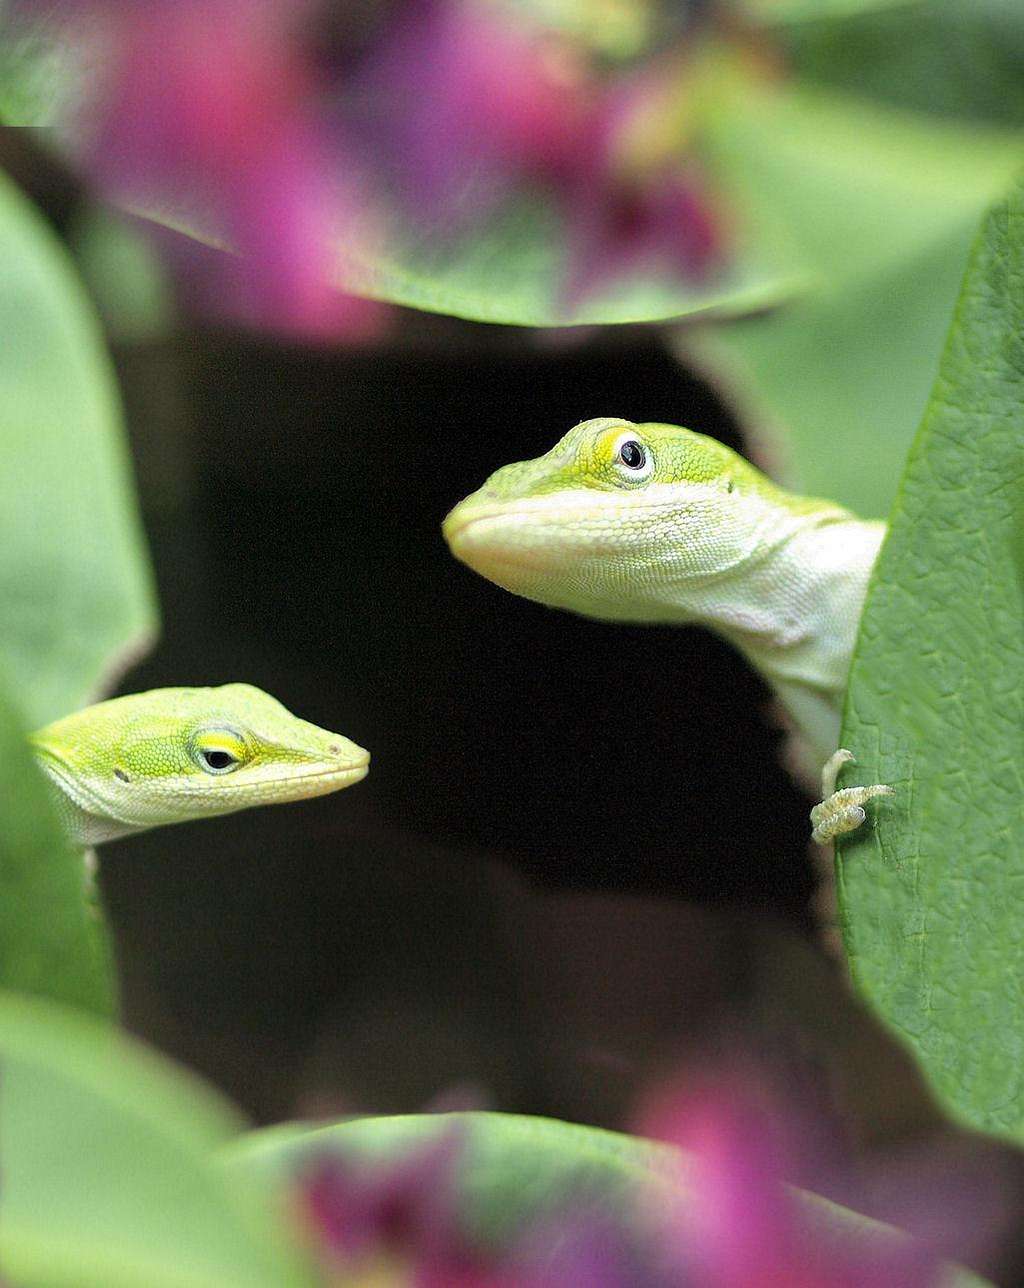 Anole lizards X Two